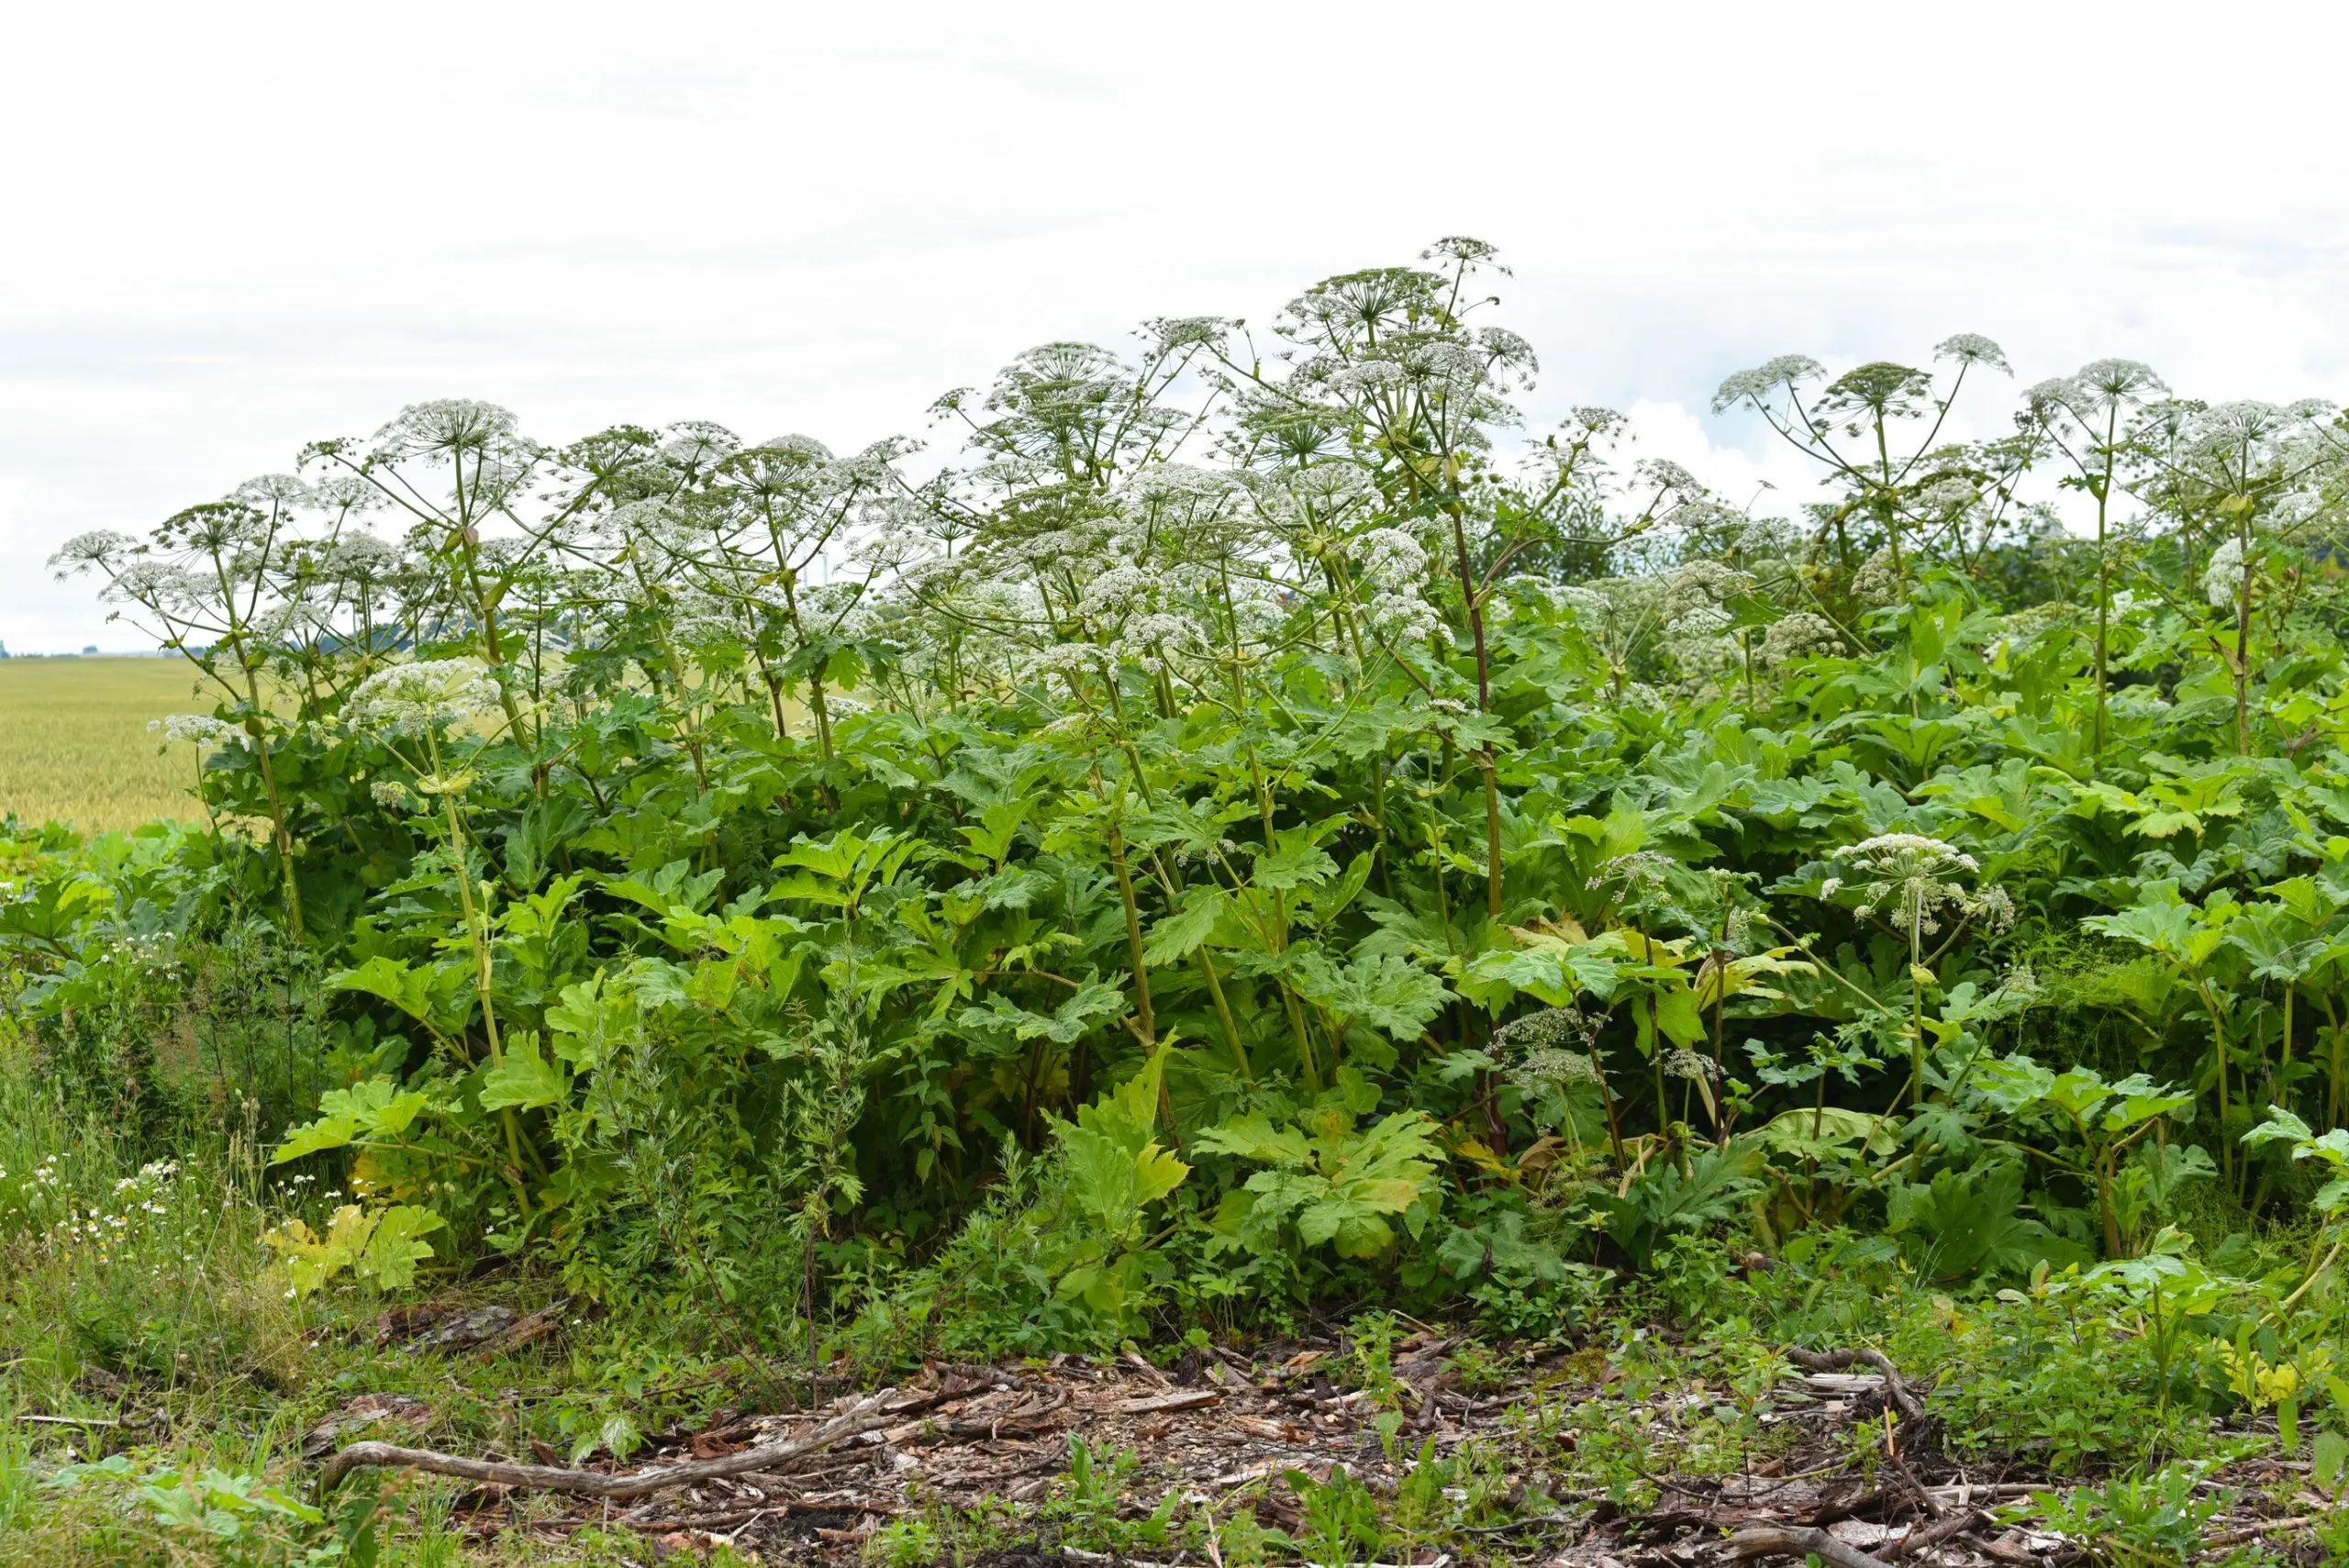 Giant Hogweed consumes a large area and it is a highly invasive and dangerous toxic plant